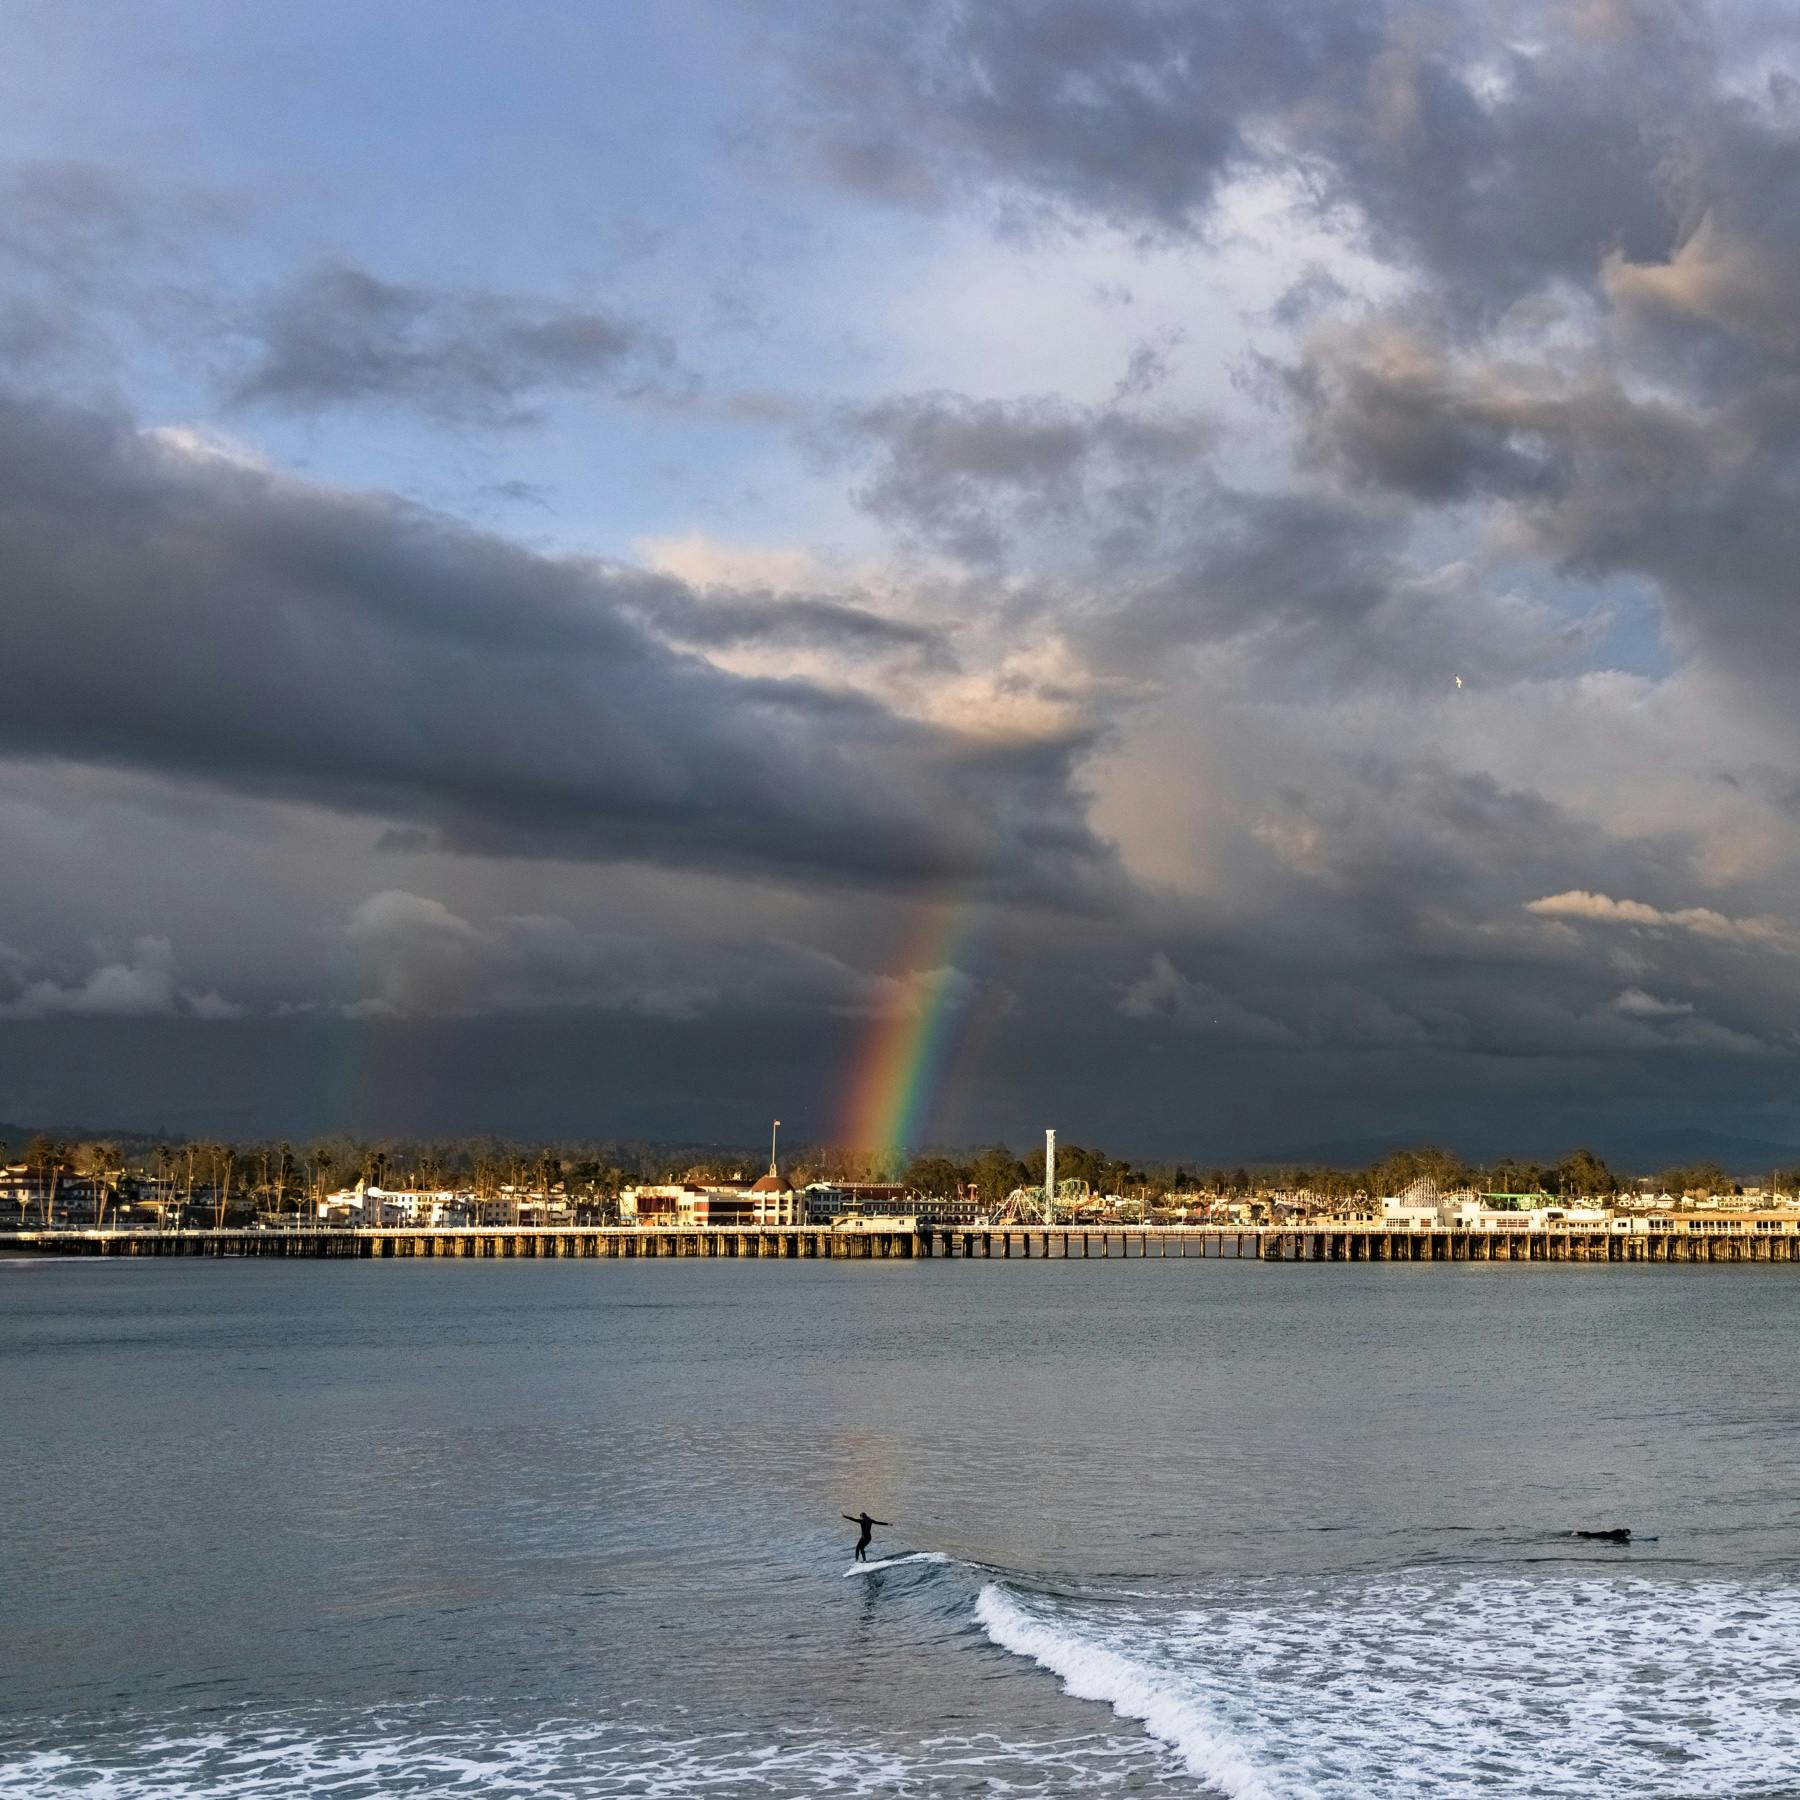 A surfer rides a wave from the nose of his surfboard with the Santa Cruz Municipal Wharf and Beach Boardwalk in the background with a rainbow shining through some dark clouds above captured by Ryan "Chachi" Craig